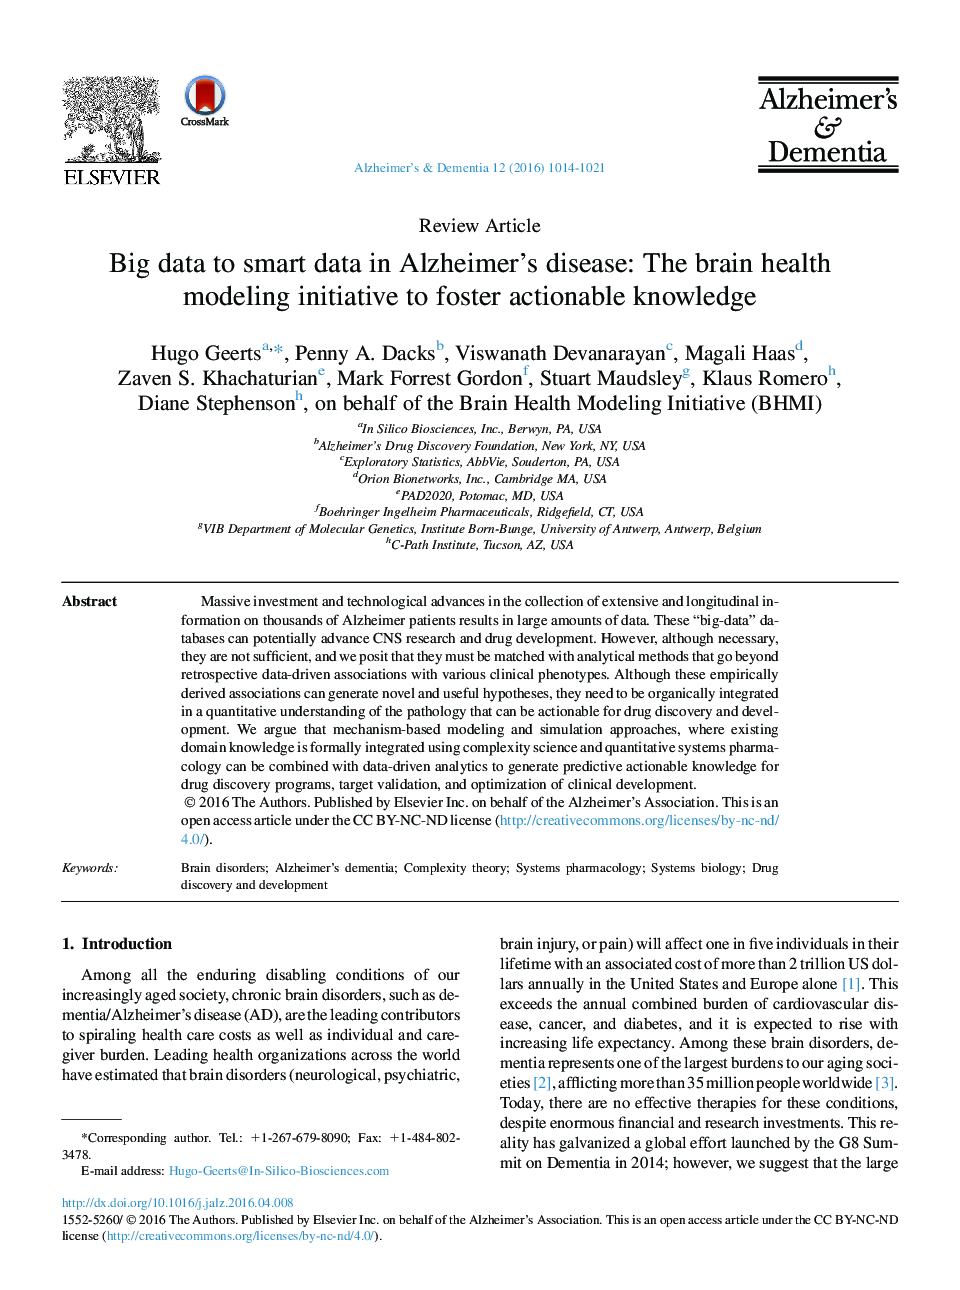 Review ArticleBig data to smart data in Alzheimer's disease: The brain health modeling initiative to foster actionable knowledge